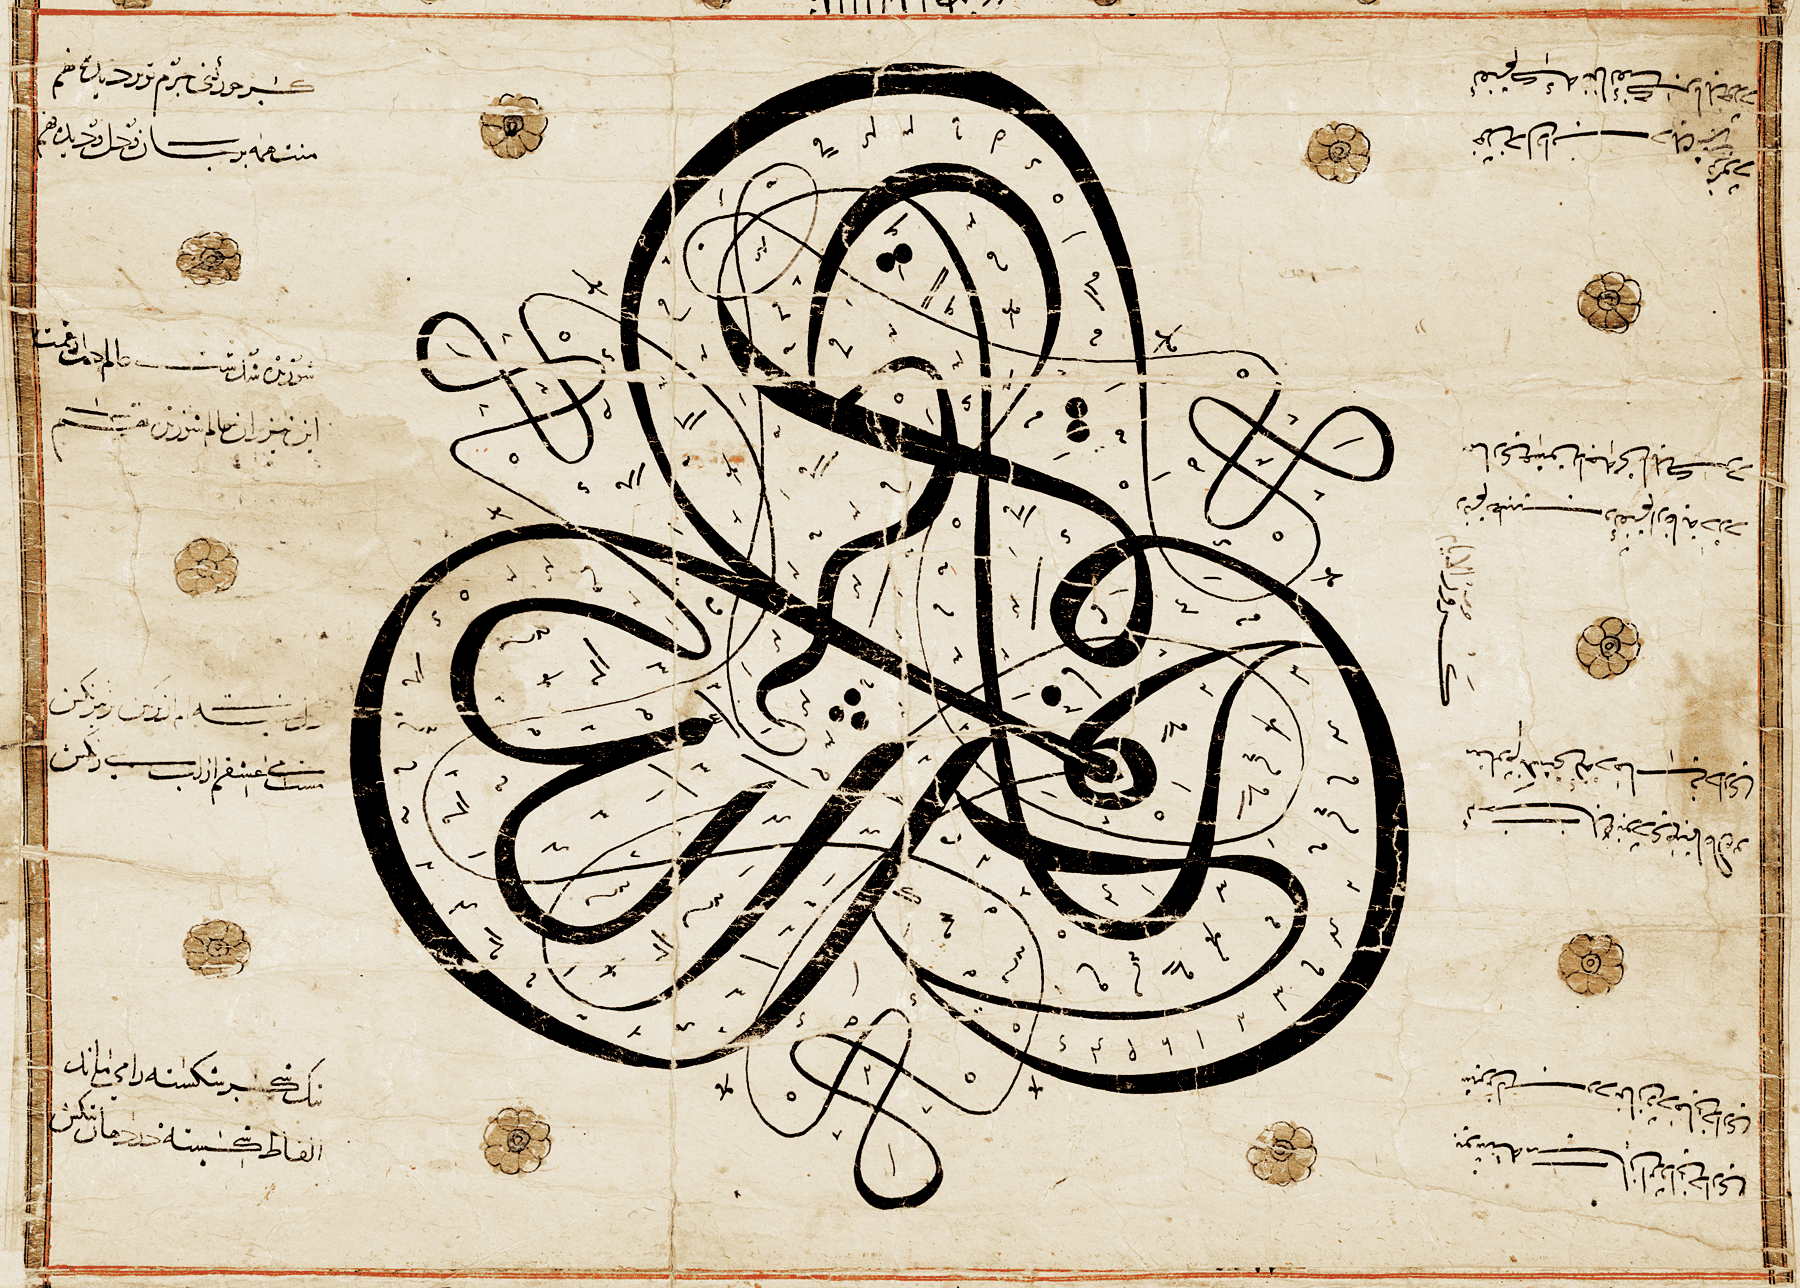 A portion of an Islamic scroll.